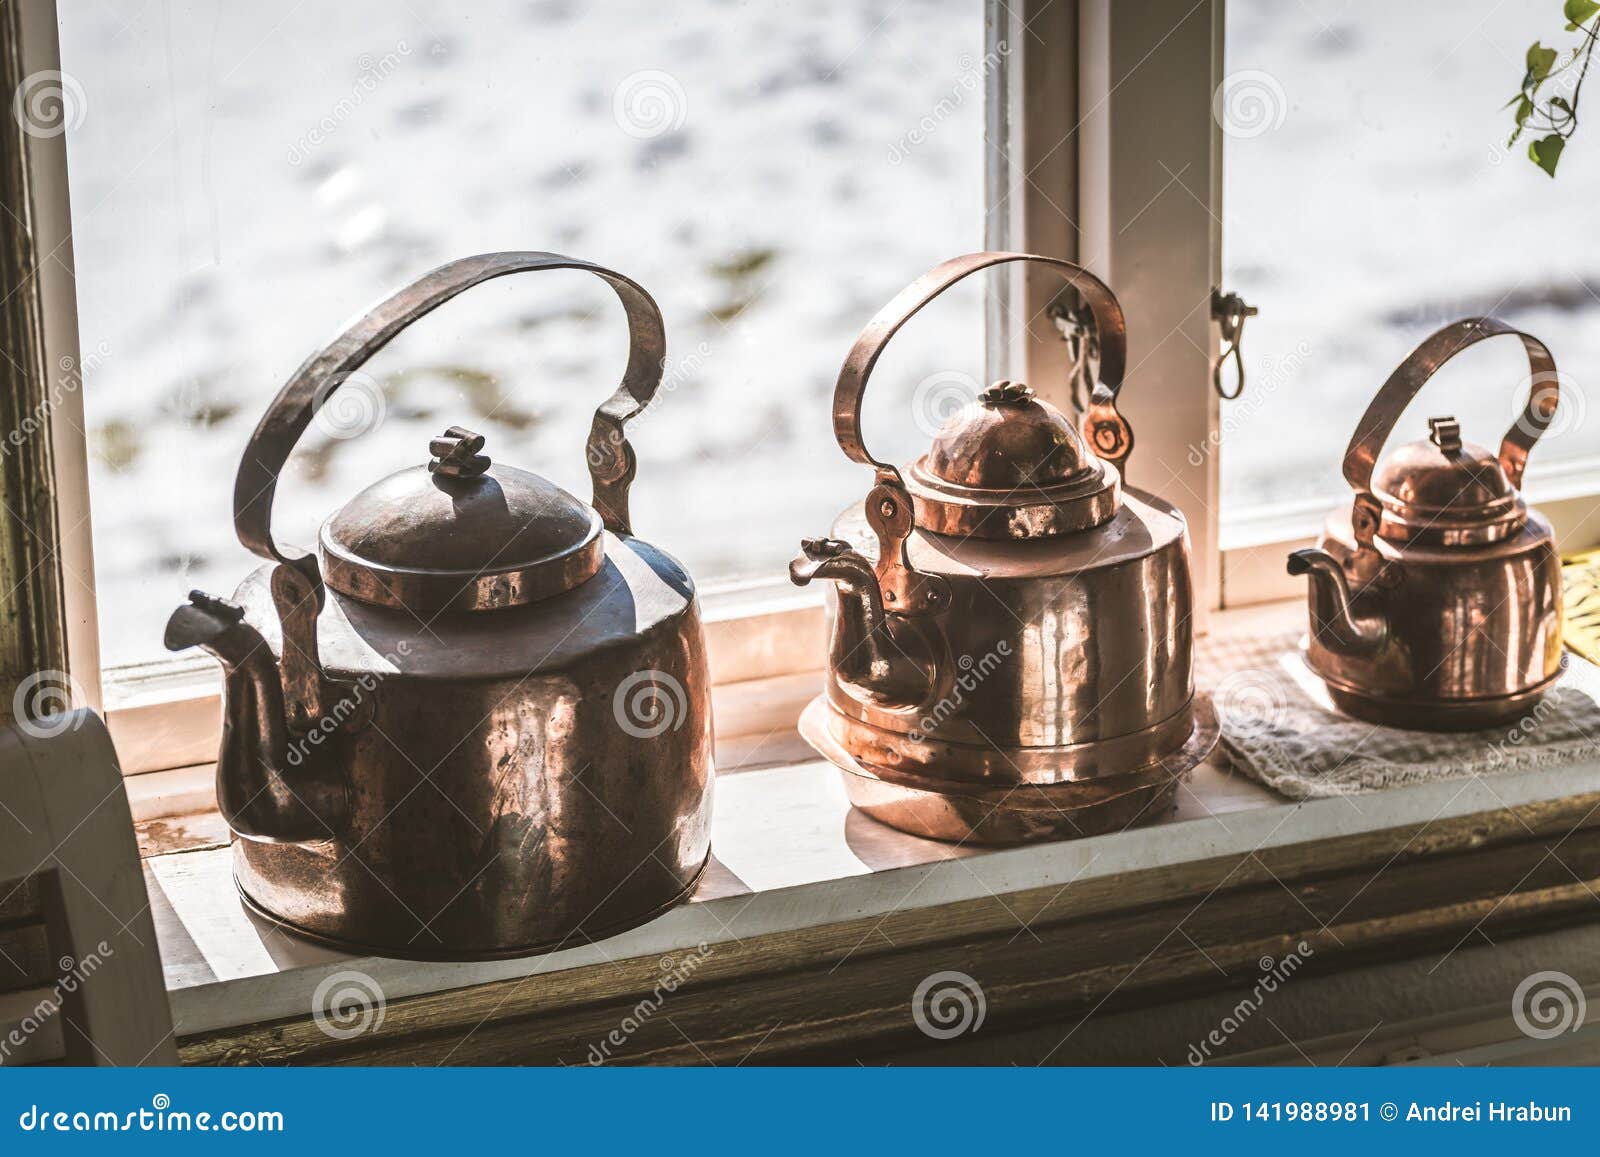 Vintage Old Style Metal Kettle On The Window Sill Stock